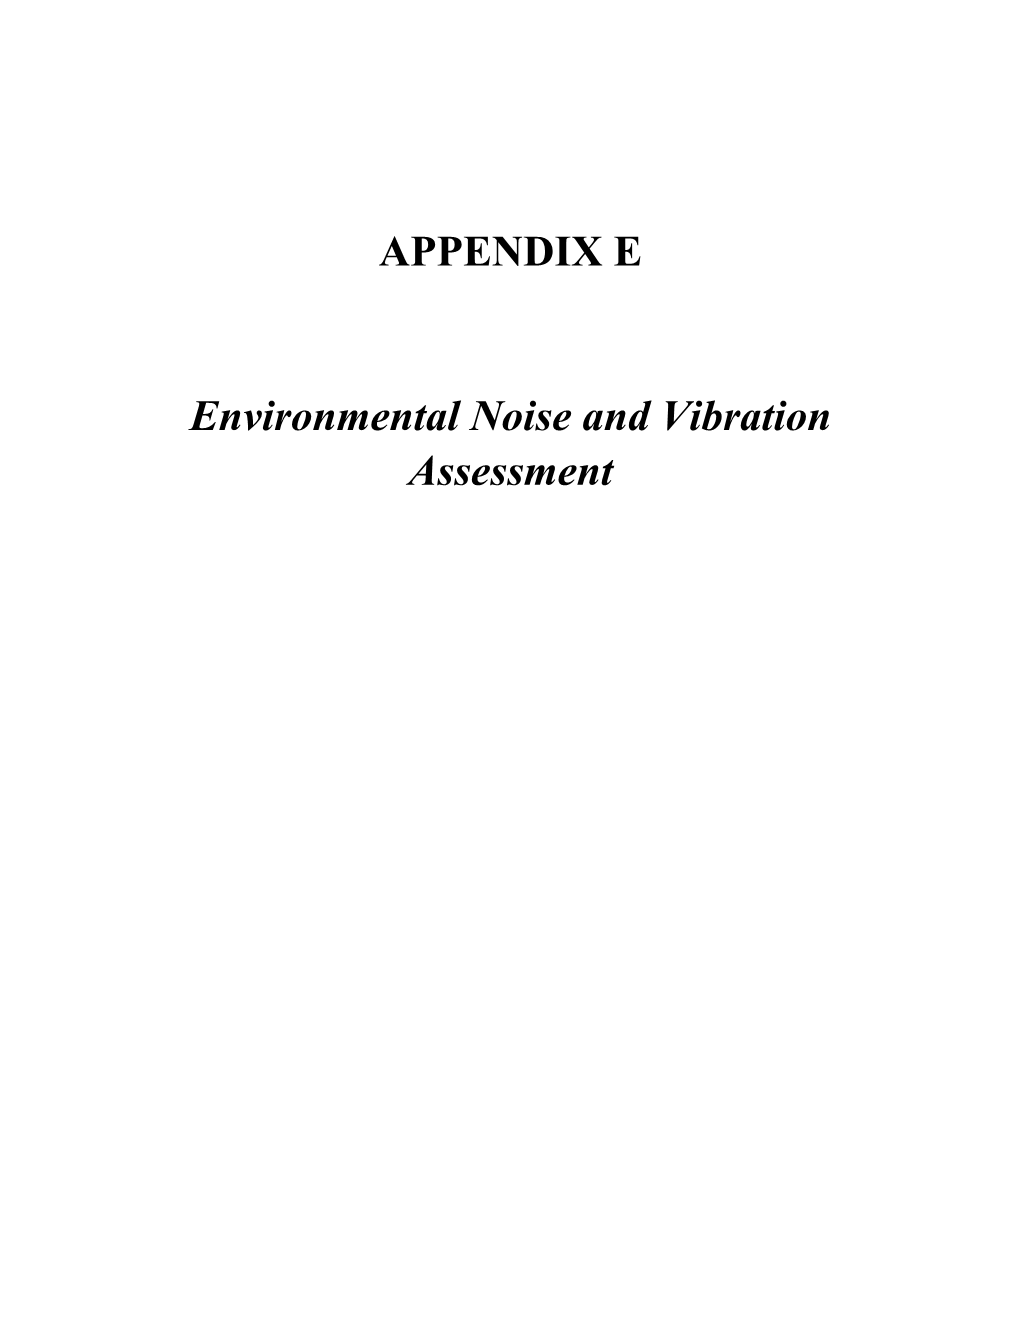 Harker School Project Environmental Noise and Vibration Assessment